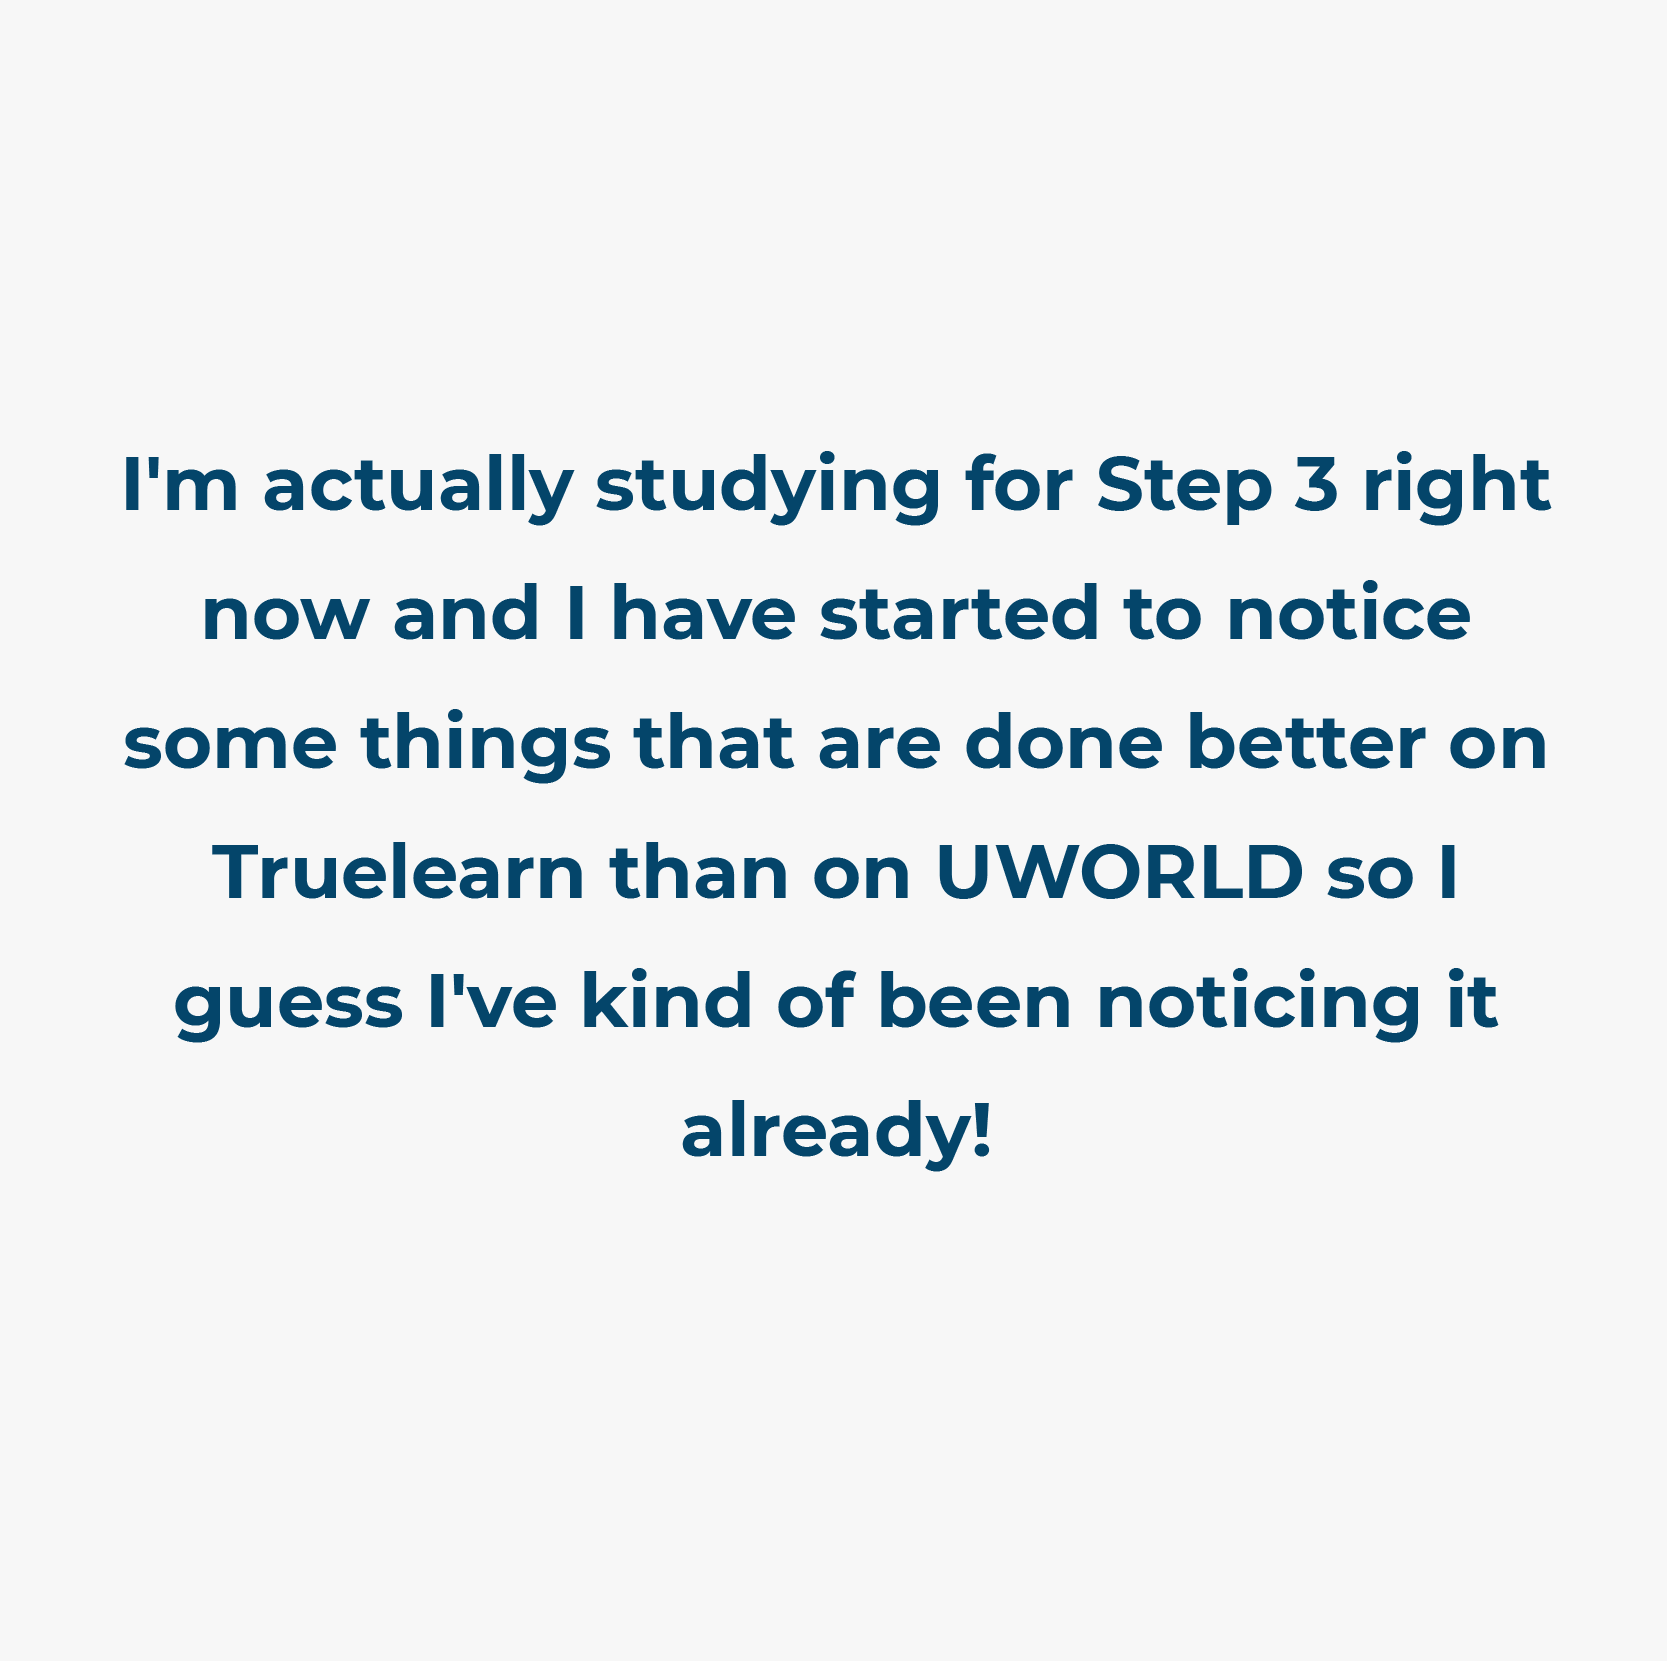 A testimonial stating how useful TrueLearn has been for their studies